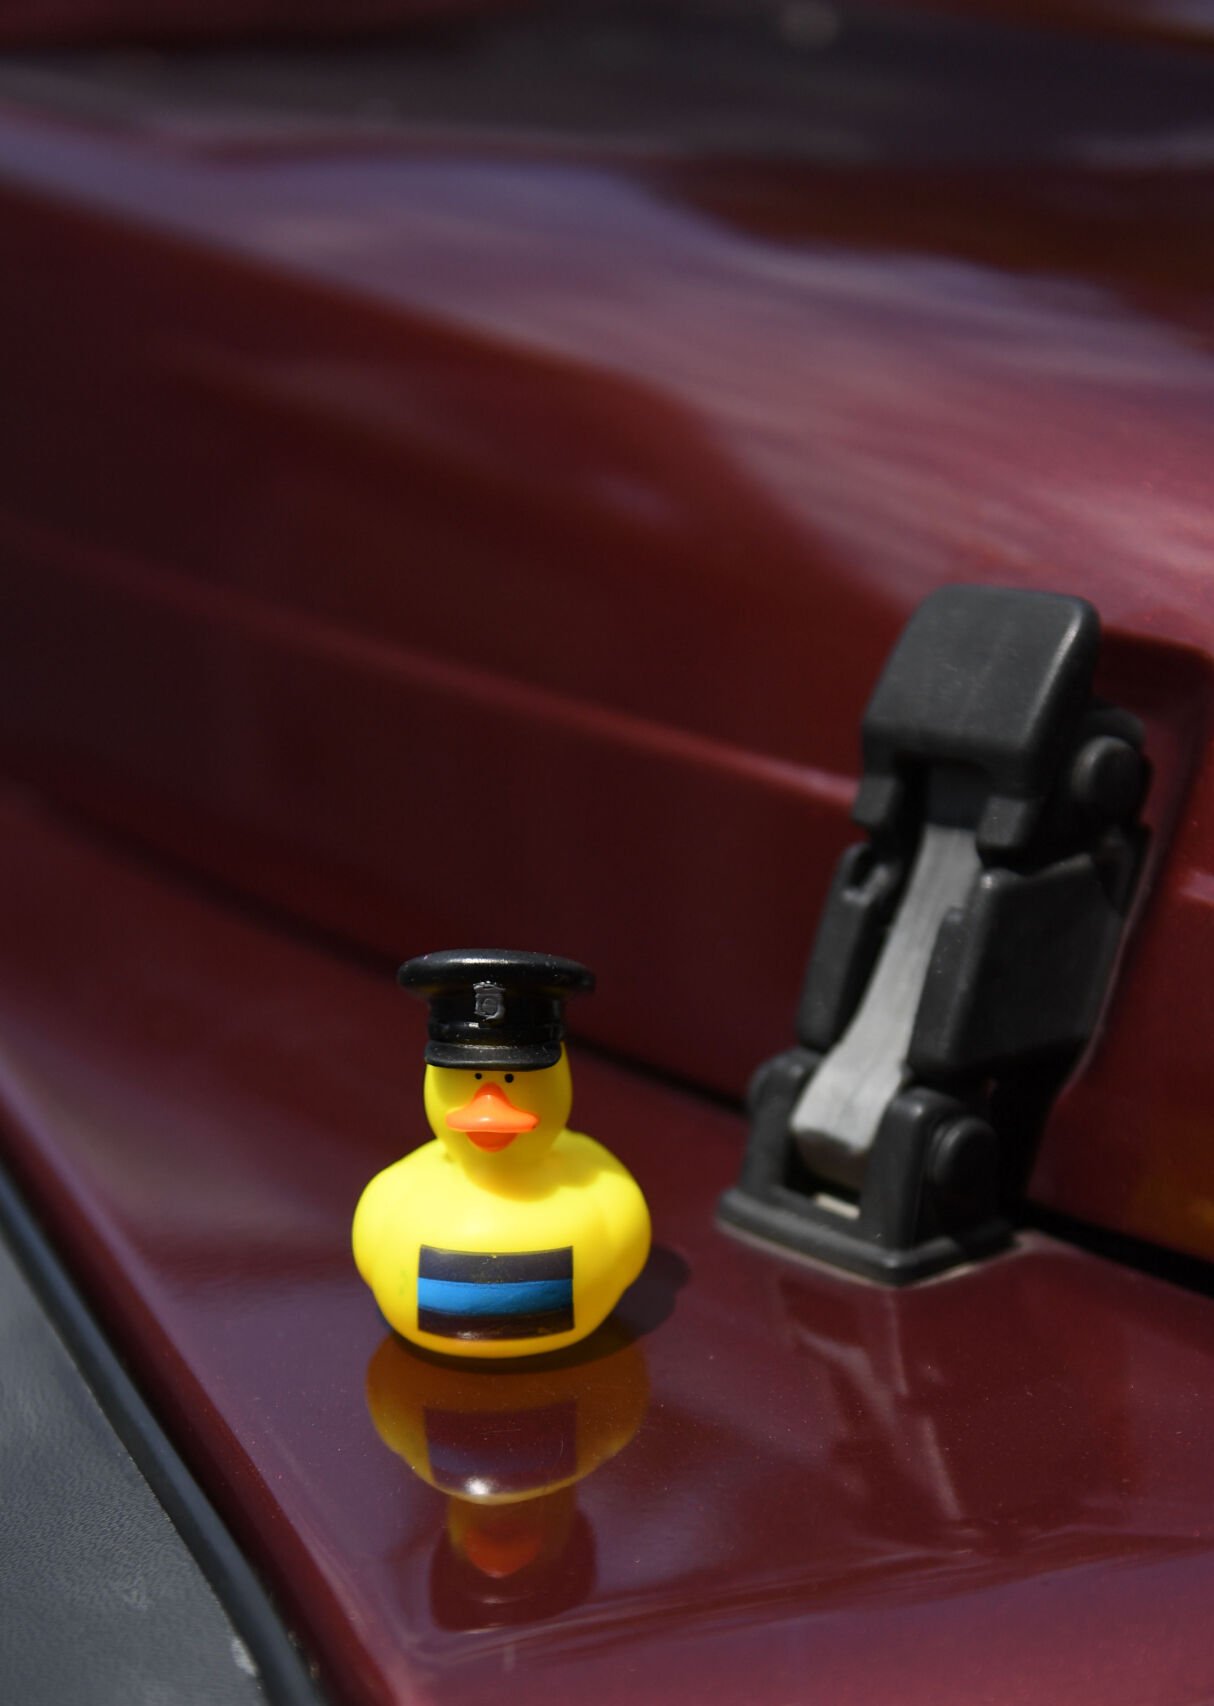 Jeep owners: Meet 'Ducktion Cups,' a simple device to keep your rubber ducks  in place